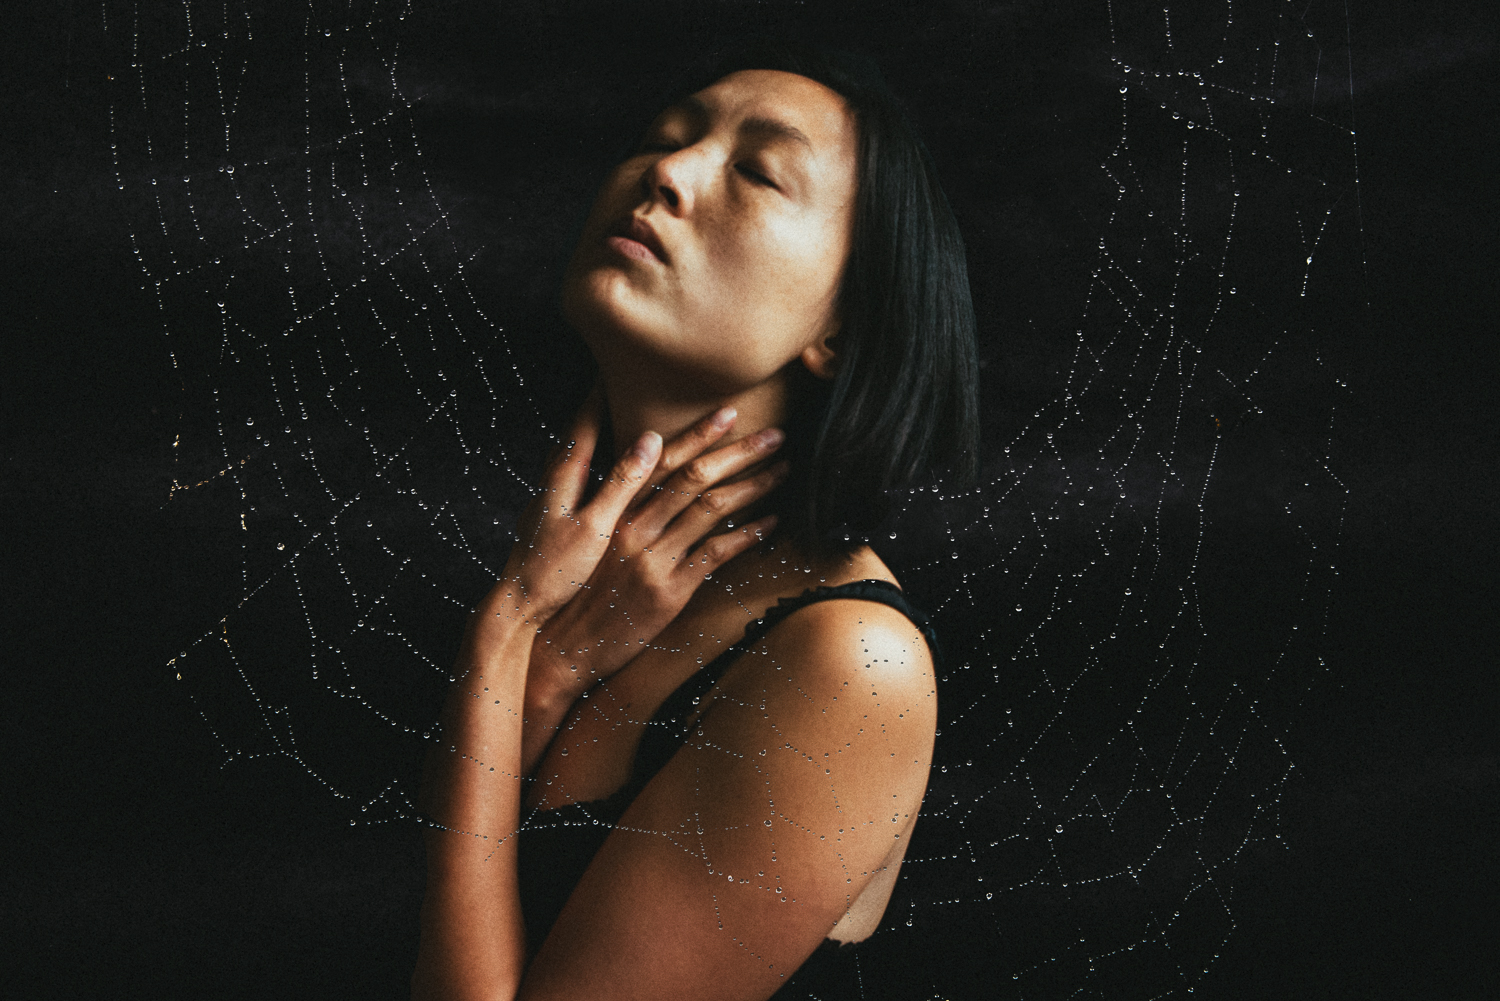 Double exposure self-portrait with a spider web